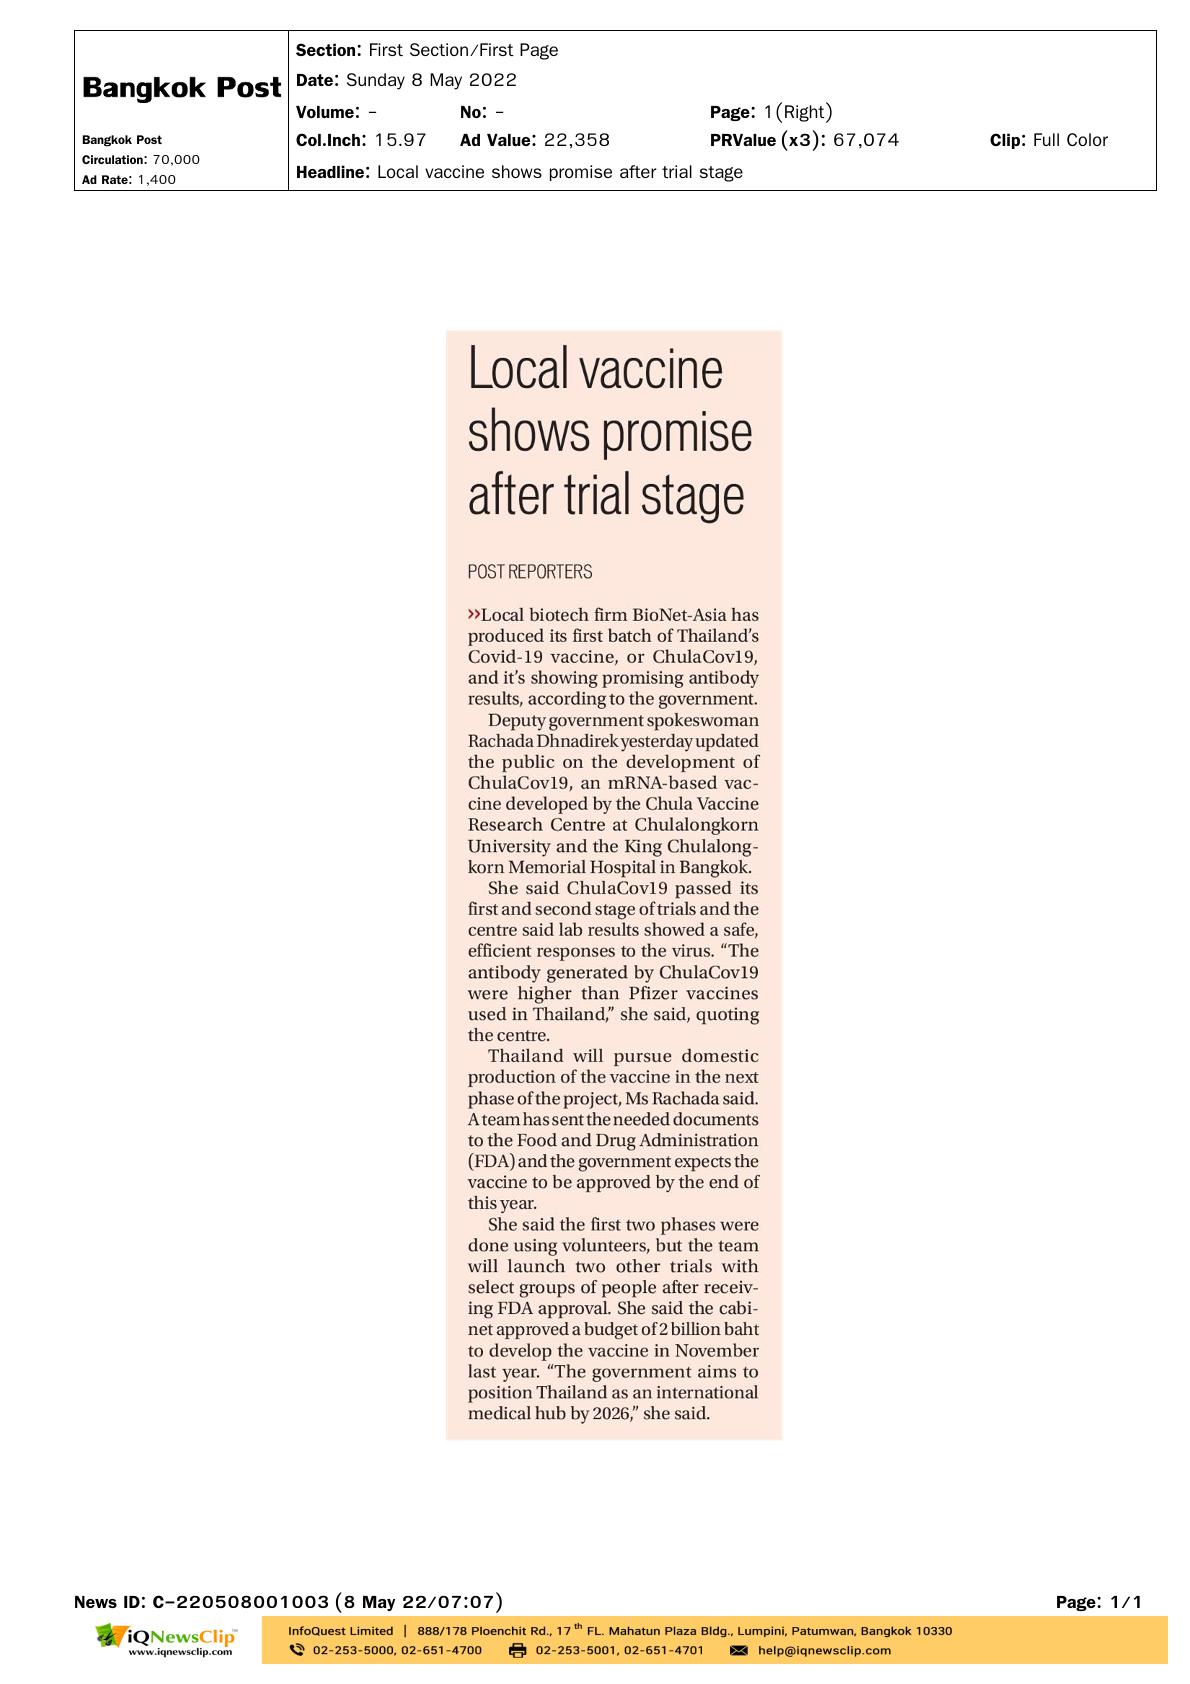 Local vaccine shows promise after trial stage